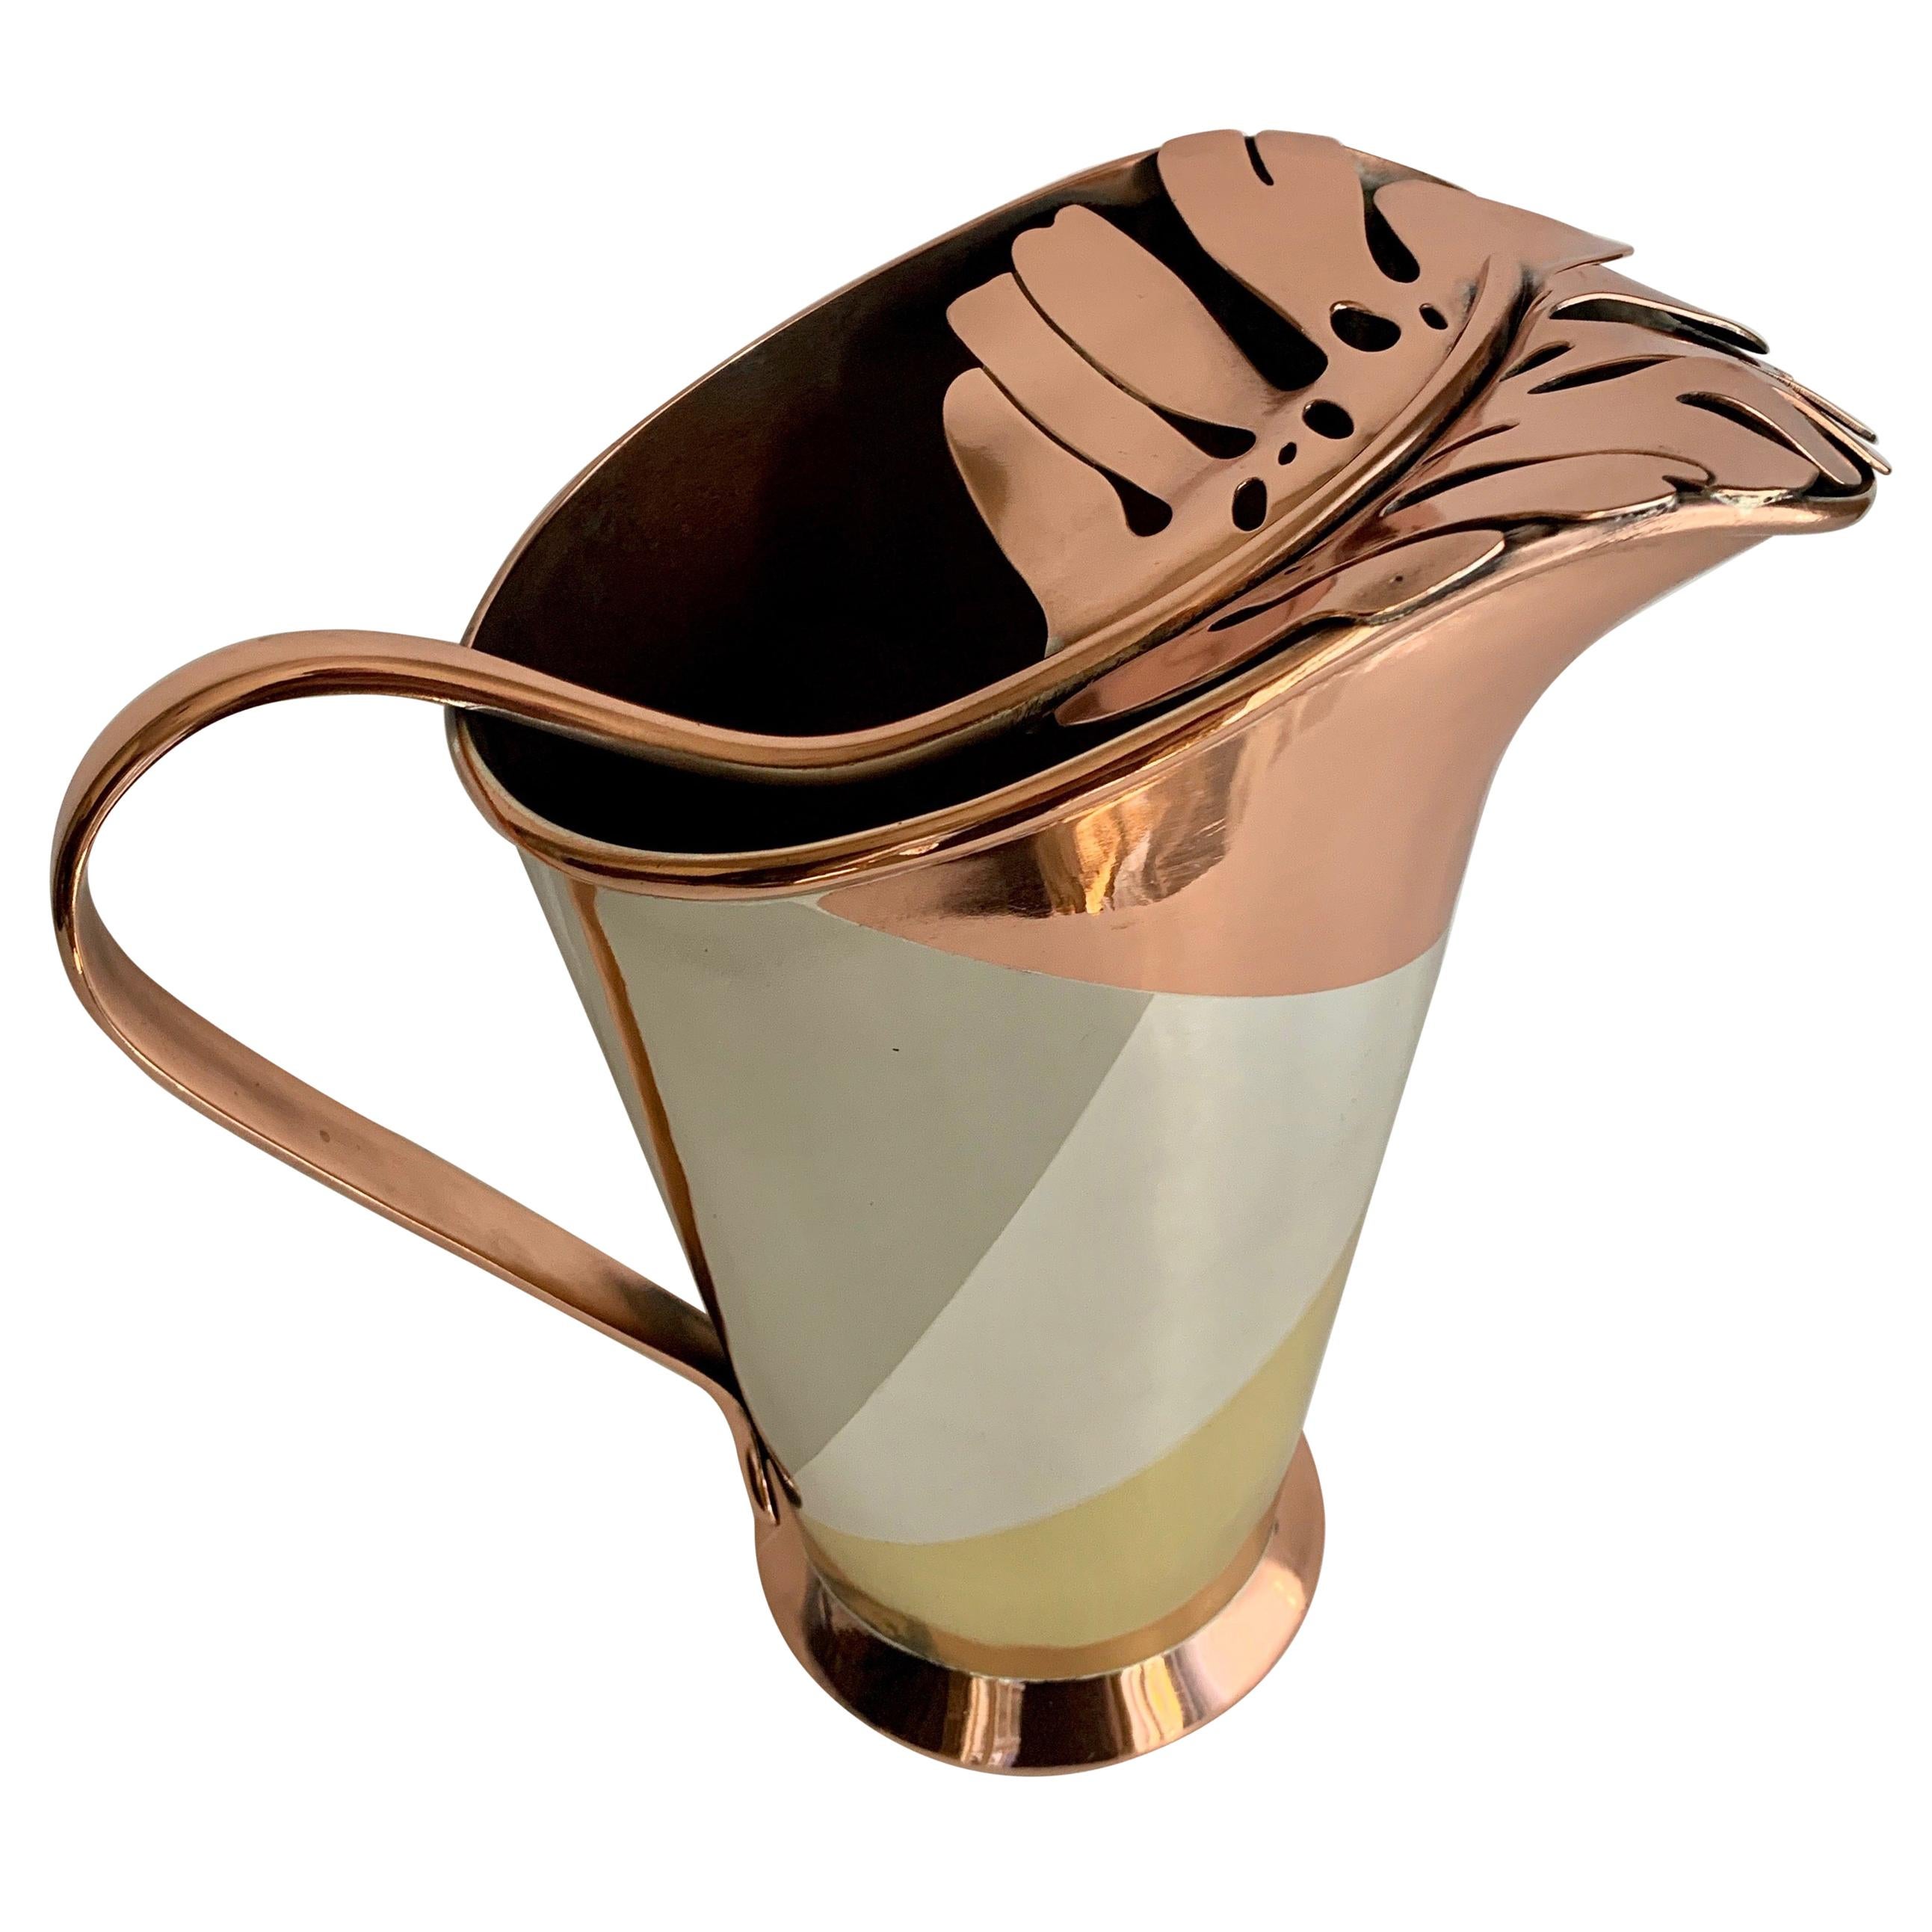 Multiple metal philodendron leaf handle pitcher by Mexican Designer Los Castillo - the pitcher is made of four metals that appear to be, Copper, Silver, Brass and Nickel. The Pitcher is a rare and handsome piece, perfect for drinks such as Sangria